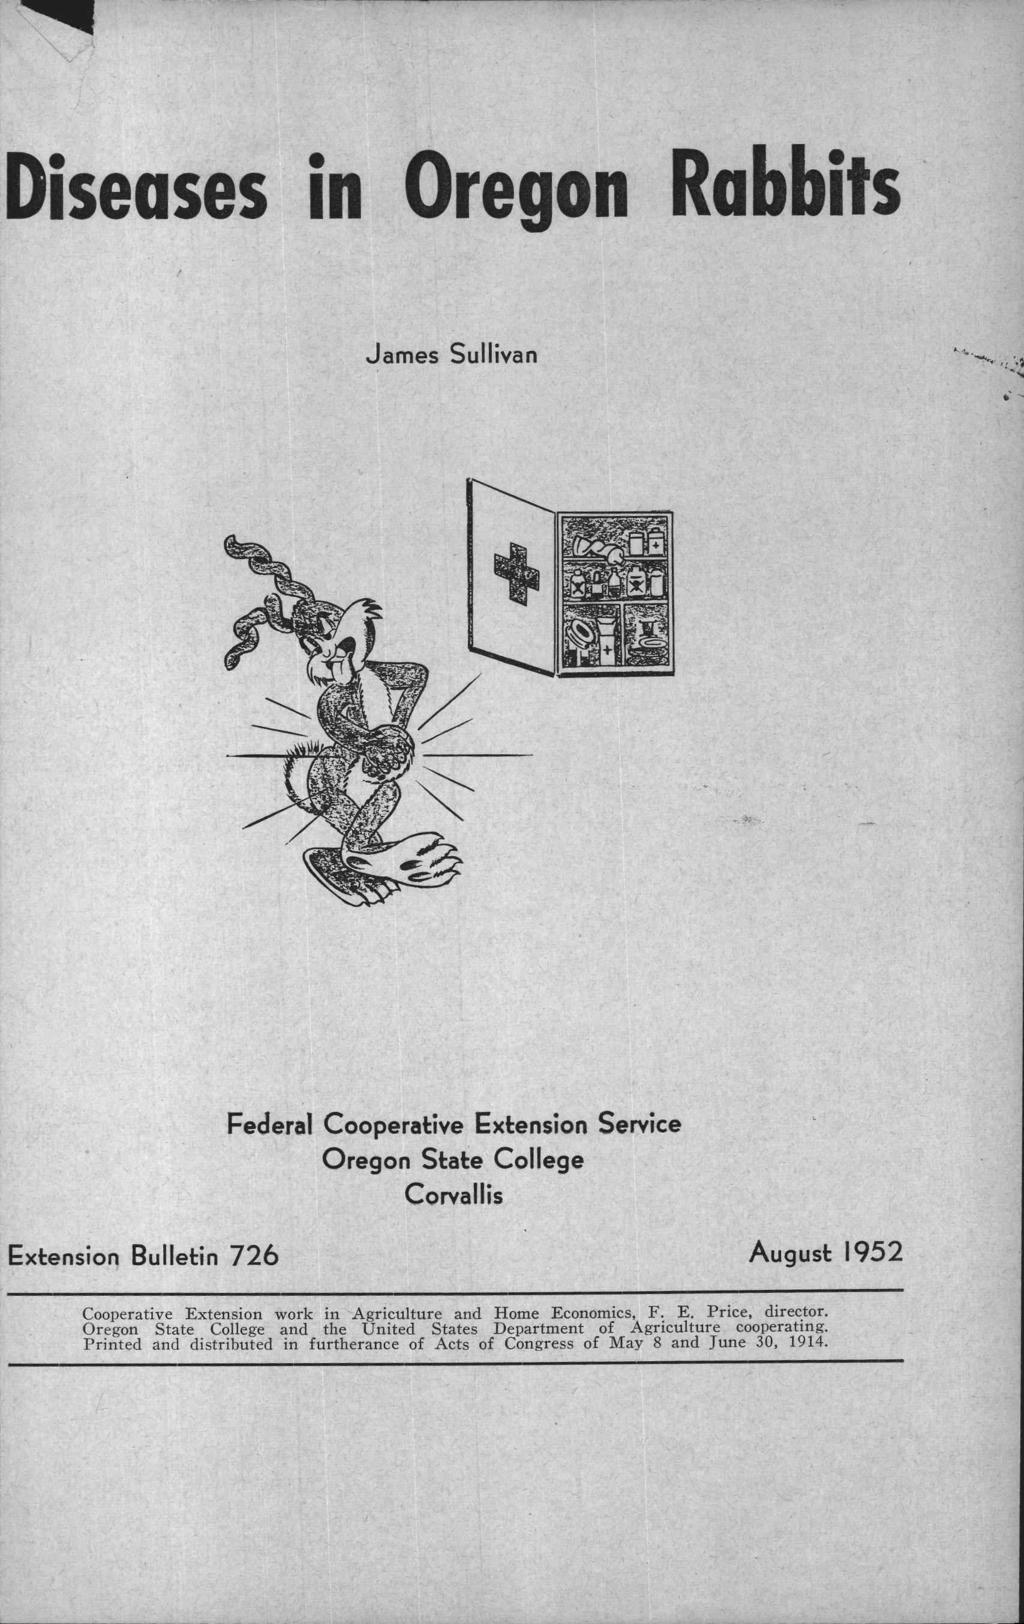 Diseases in Oregon Rabbits James Sullivan Federal Cooperative Extension Service Oregon State College Corvallis Extension Bulletin 726 August 1952 Cooperative Extension work in Agriculture and Home